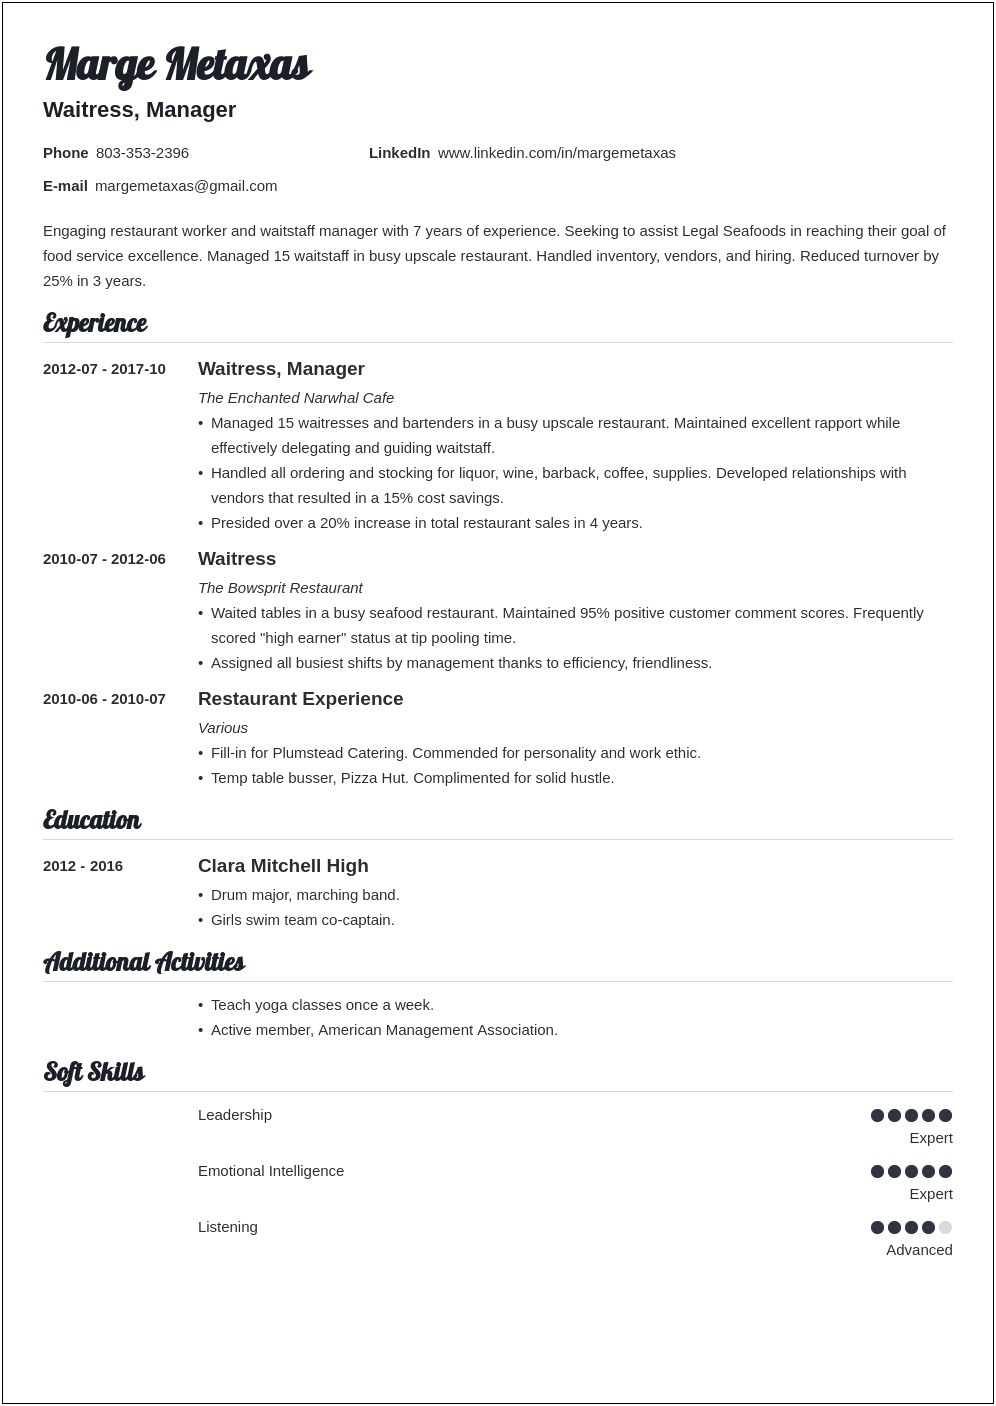 Resume Objective Statement Examples For Restaurant